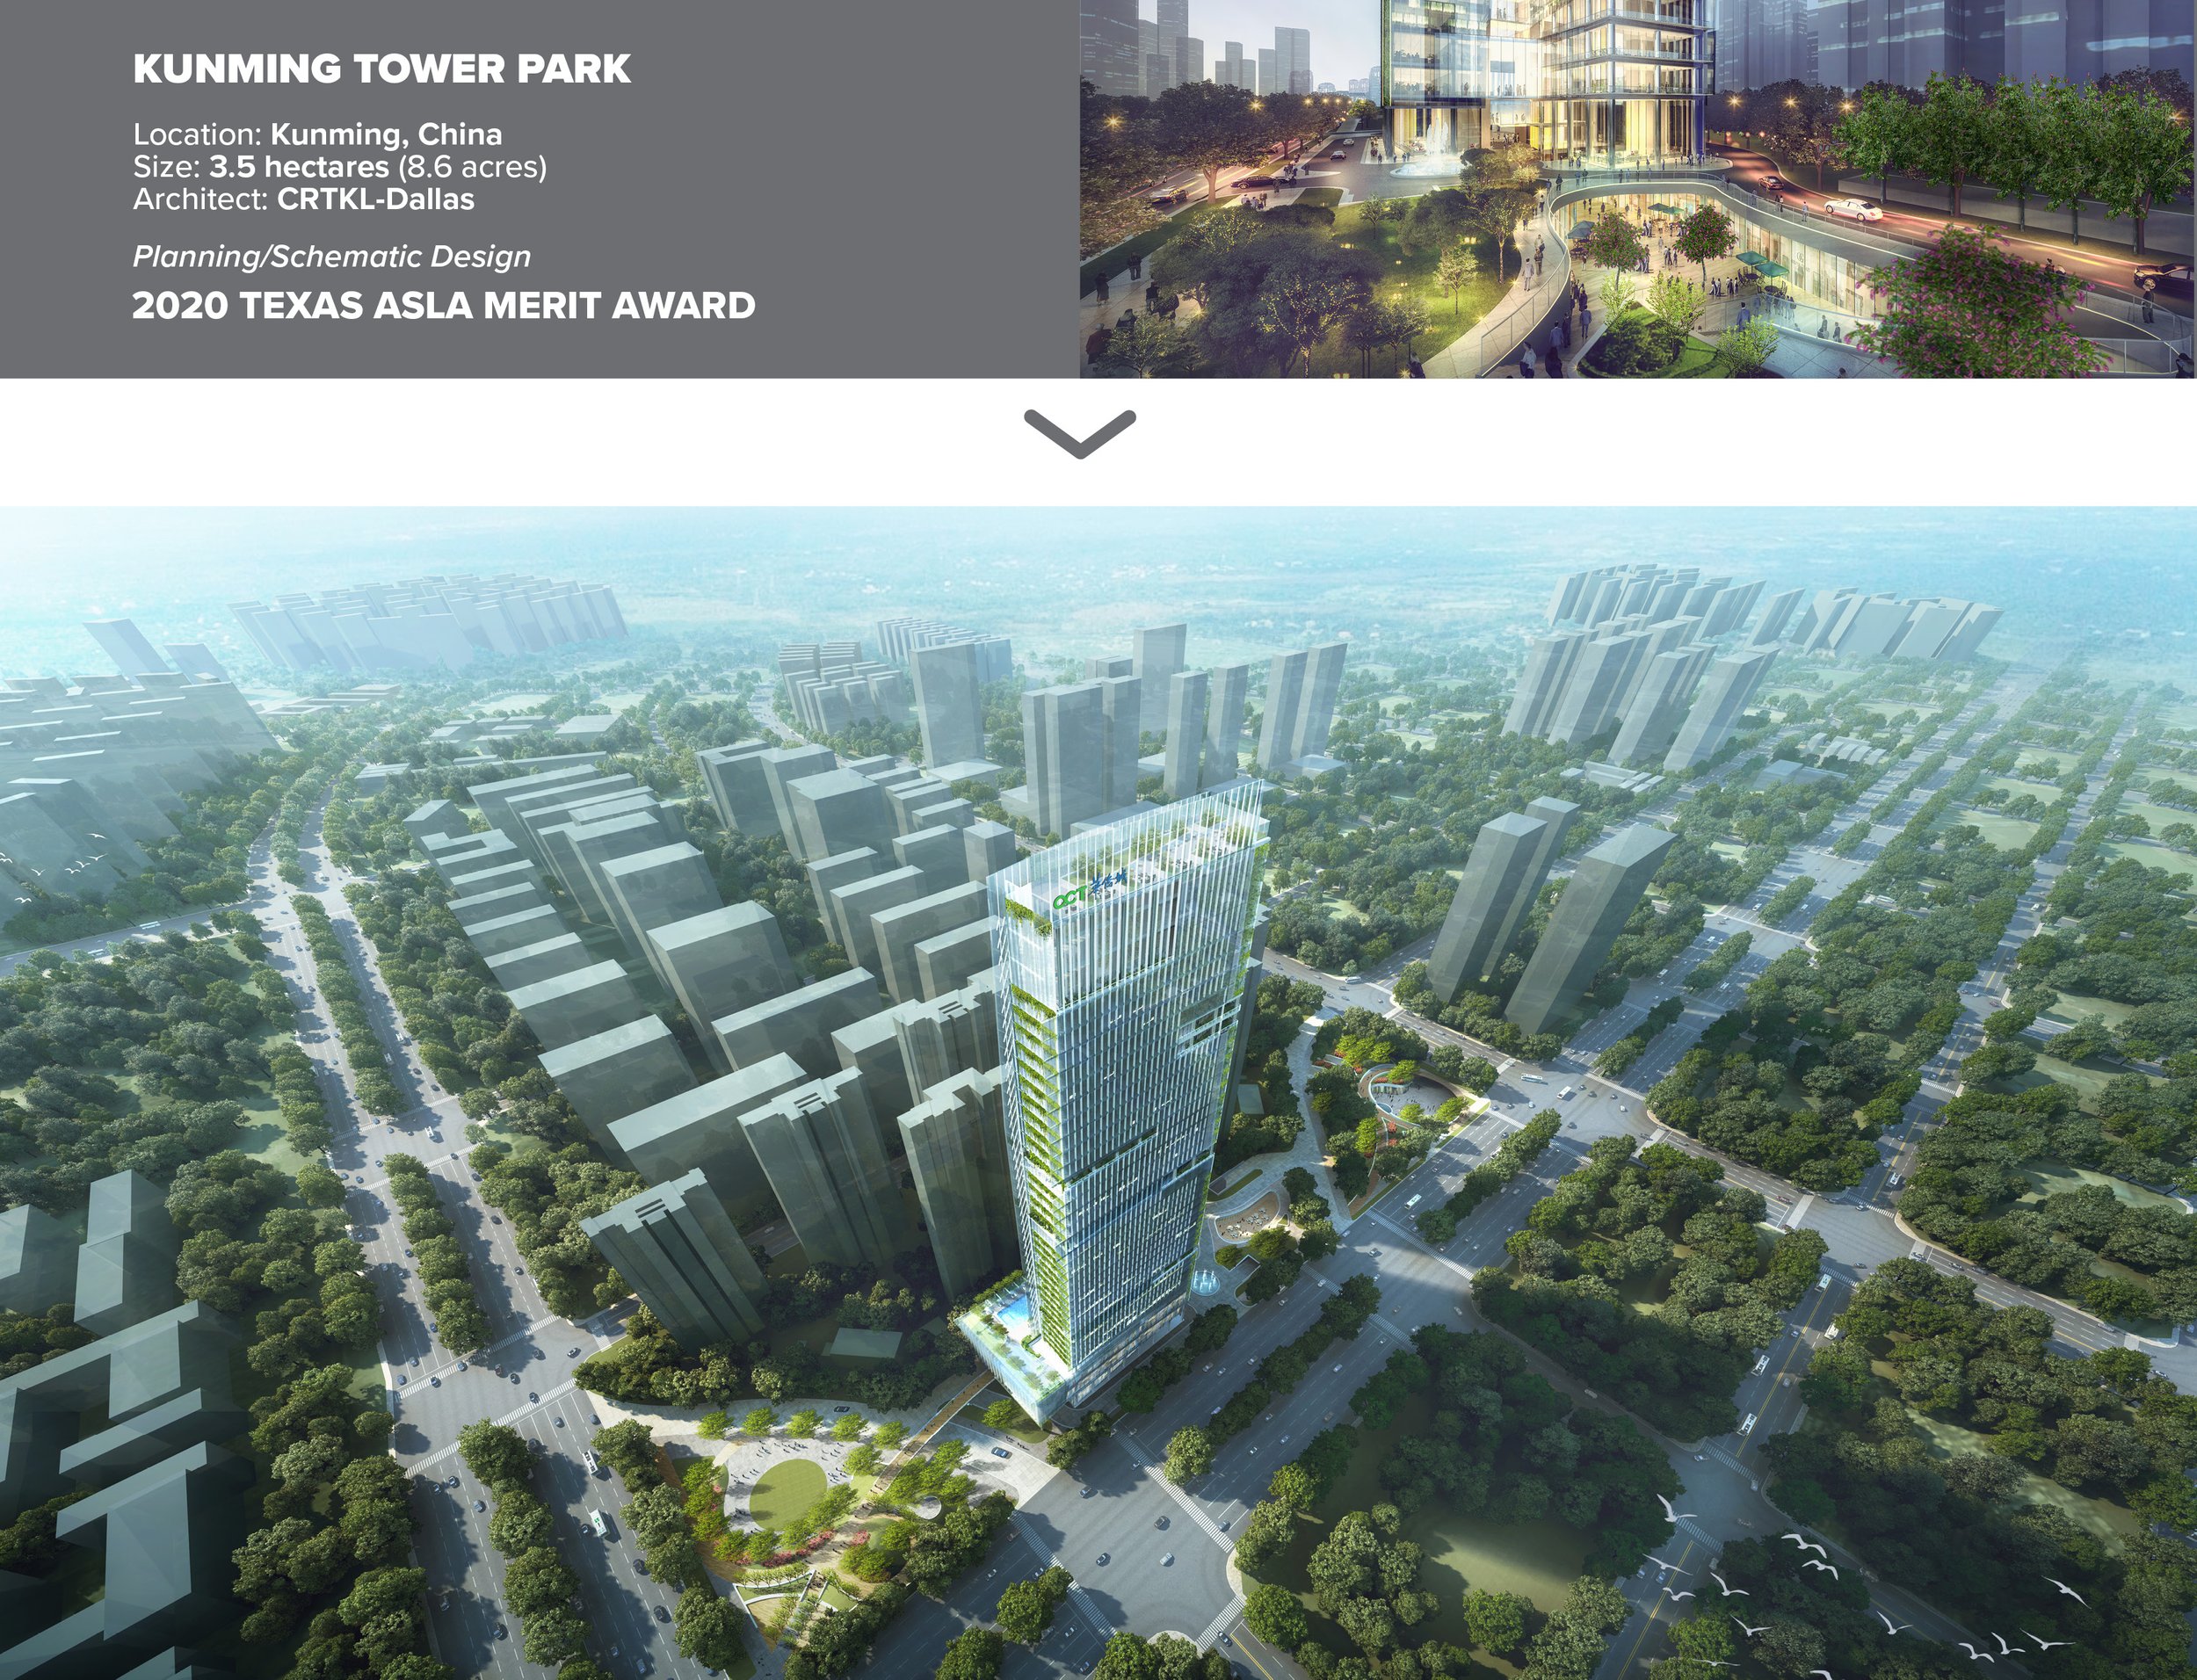  Kunming Tower Park is an urban multi-tower development that integrates adjacent public open space to create a multi-level urban landscape and public plaza. The integrated site and architectural design proposes multiple connections such as pedestrian